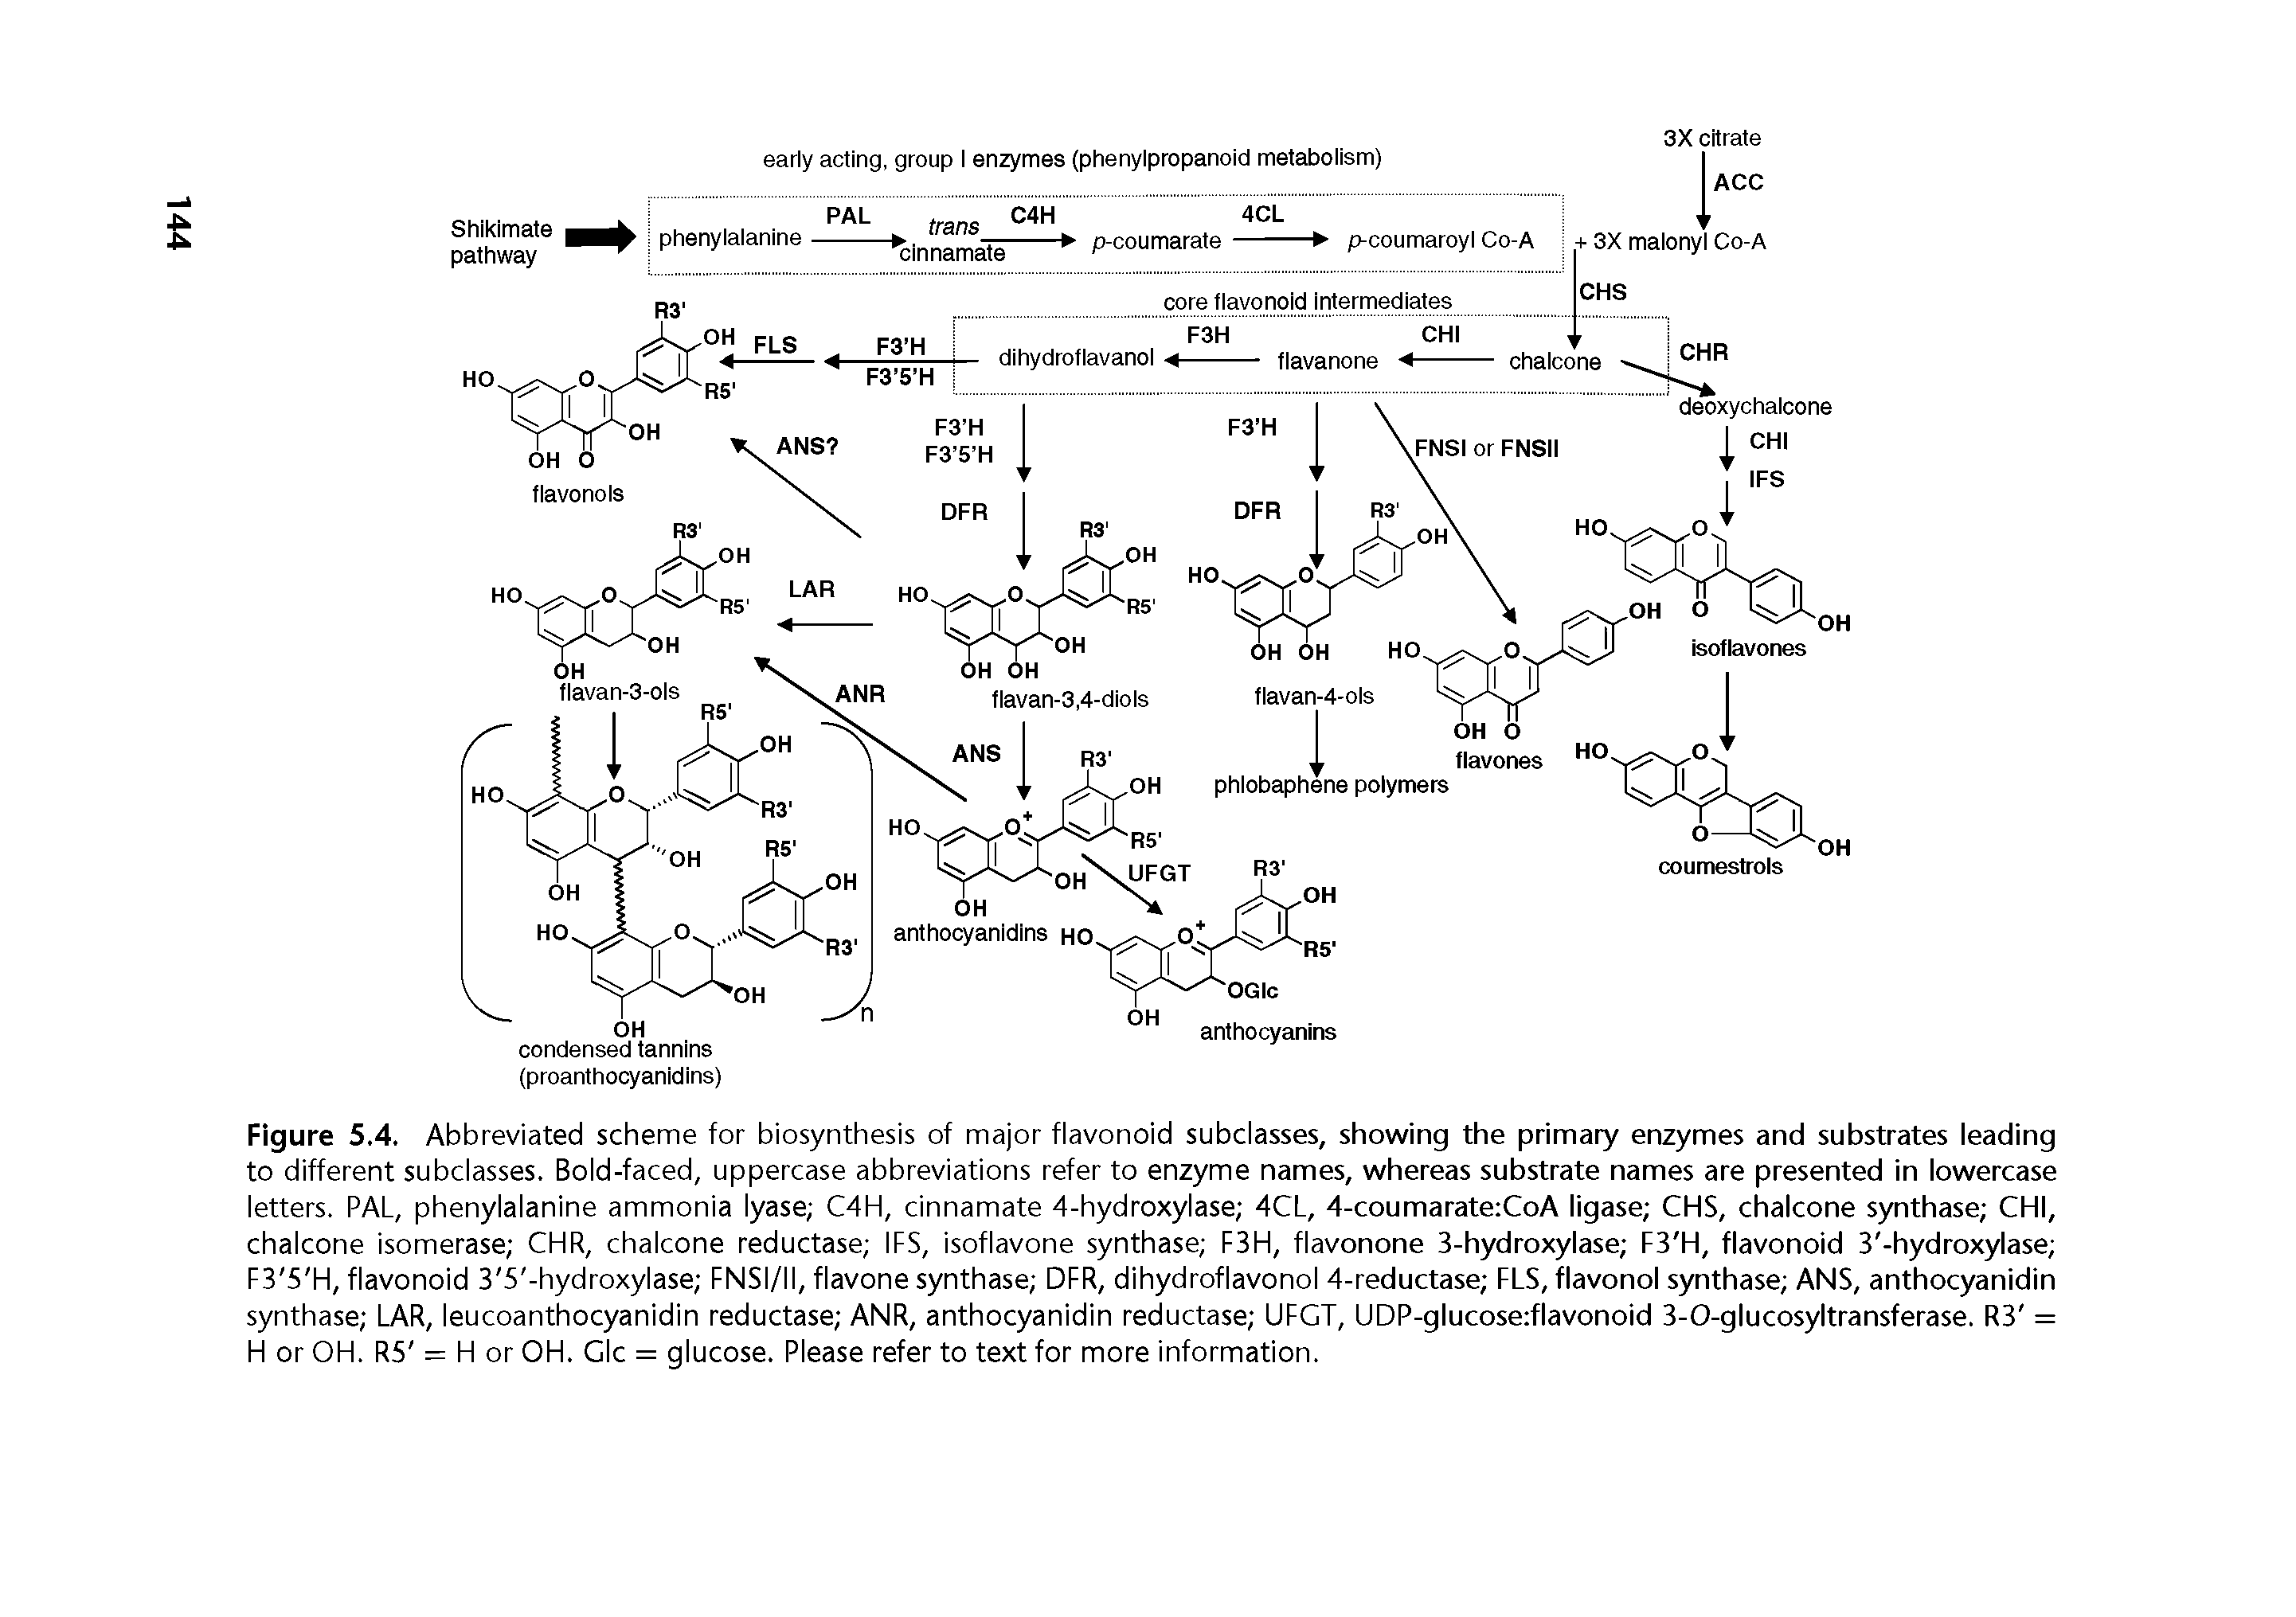 Figure 5.4. Abbreviated scheme for biosynthesis of major flavonoid subclasses, showing the primary enzymes and substrates leading to different subclasses. Bold-faced, uppercase abbreviations refer to enzyme names, whereas substrate names are presented in lowercase letters. PAL, phenylalanine ammonia lyase C4H, cinnamate 4-hydroxylase 4CL, 4-coumarate CoA ligase CHS, chalcone synthase CHI, chalcone isomerase CHR, chalcone reductase IPS, isoflavone synthase F3H, flavonone 3-hydroxylase F3 H, flavonoid 3 -hydroxylase F3 5 H, flavonoid 3 5 -hydroxylase FNSI/II, flavone synthase DFR, dihydroflavonol 4-reductase FLS, flavonol synthase ANS, anthocyanidin synthase LAR, leucoanthocyanidin reductase ANR, anthocyanidin reductase UFGT, UDP-glucose flavonoid 3-O-glucosyltransferase. R3 = H or OH. R5 = H or OH. Glc = glucose. Please refer to text for more information.